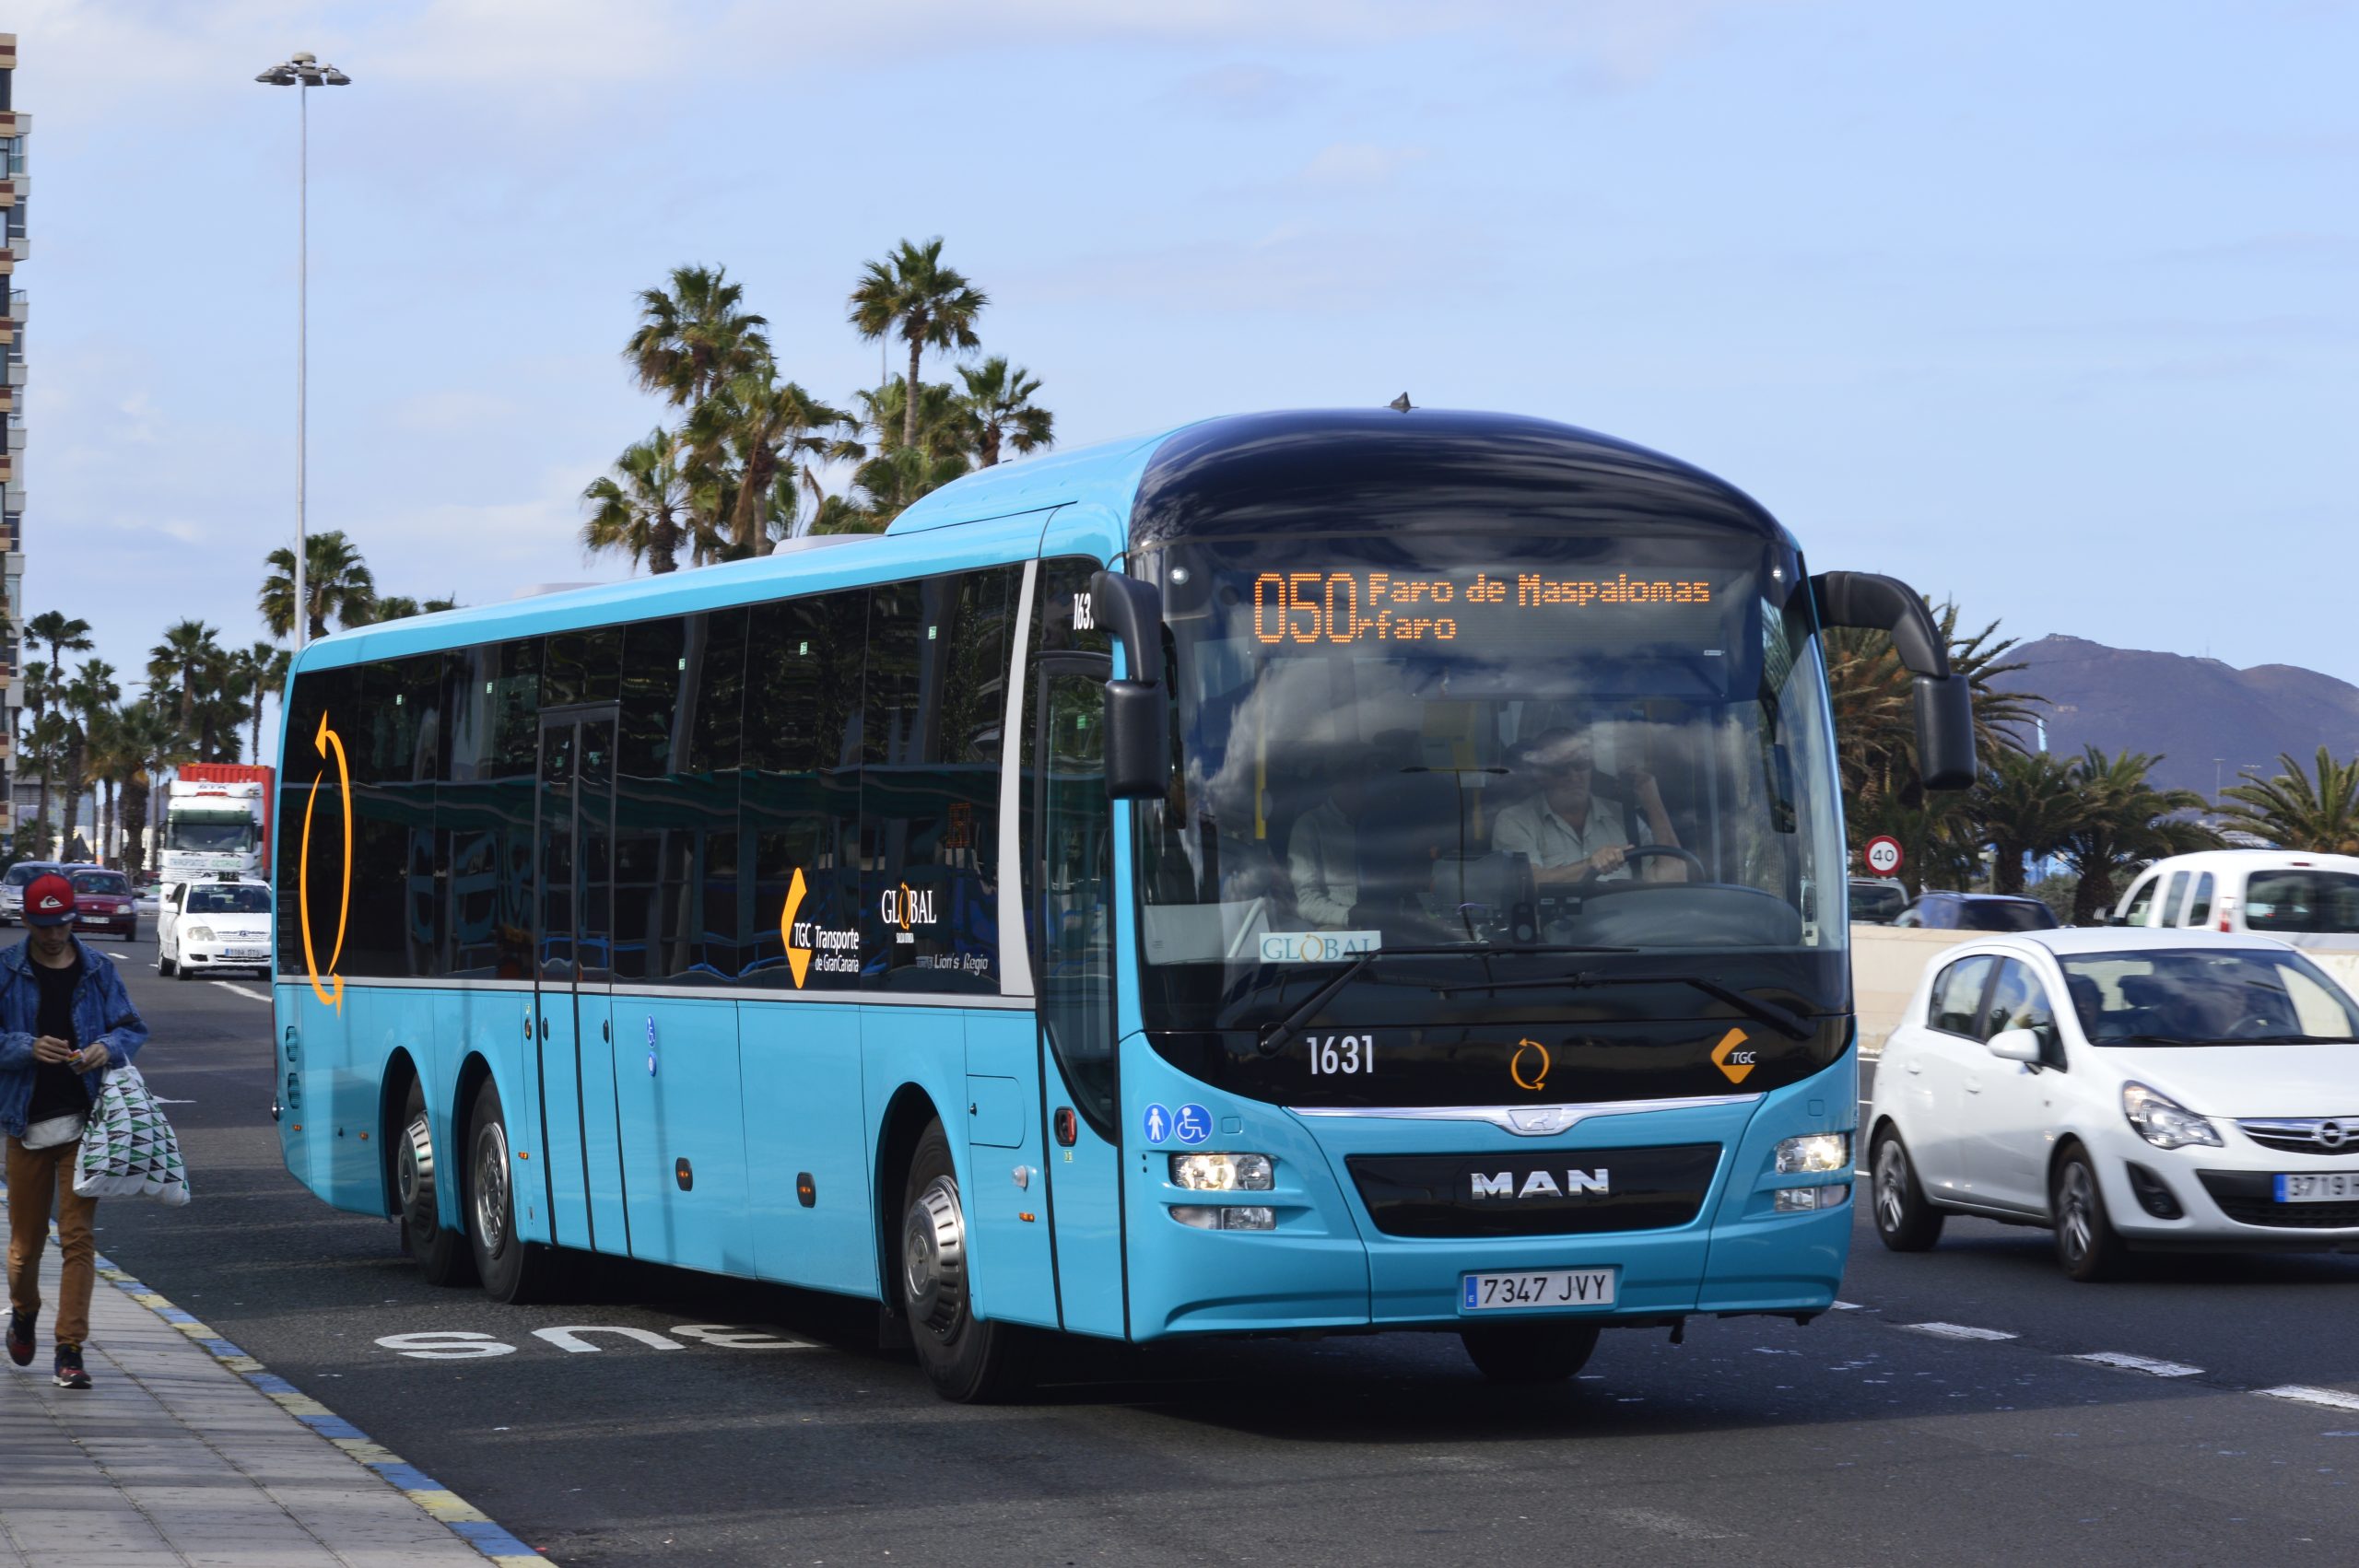 How To Get From Gran Canaria Airport To Puerto de Mogan - All Possible Ways, cheapest way from Gran Canaria airport to Puerto de Mogan, Gran Canaria airport to Puerto de Mogan, Gran Canaria airport to Puerto de Mogan, Gran Canaria airport to Puerto de Mogan, Gran Canaria Bus Airport, bus from Gran Canaria airport to Puerto de Mogan, taxi Gran Canaria airport to Puerto de Mogan, Uber Gran Canaria airport to Puerto de Mogan, Gran Canaria airport to Puerto de Mogan by bus, Gran Canaria airport to Puerto de Mogan, Gran Canaria to Puerto de Mogan, Global bus fare Gran Canaria airport to Puerto de Mogan, Gran Canaria airport to taurito